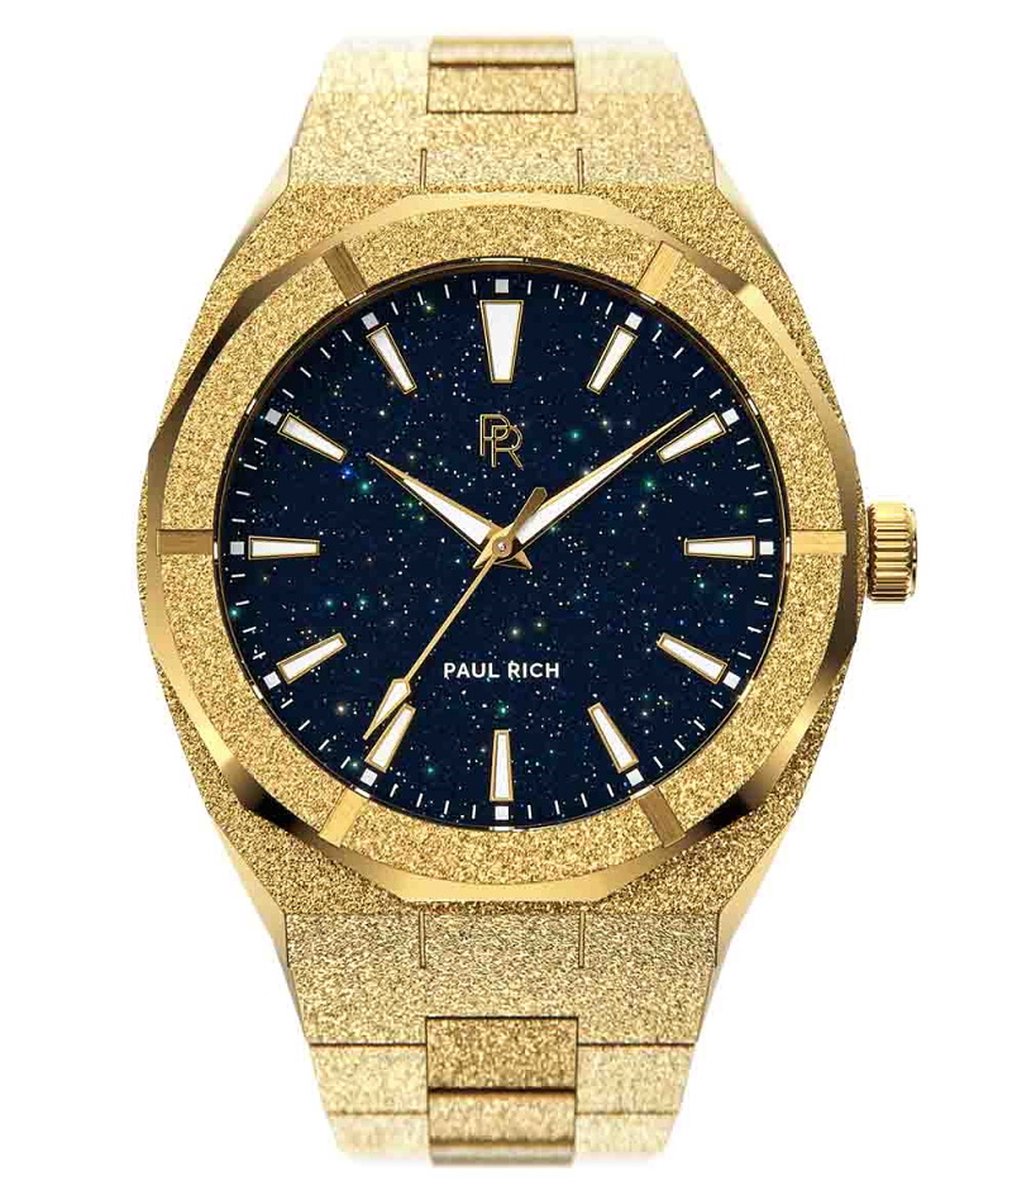 Paul Rich Frosted Star Dust Gold FSD02 horloge 45 mm